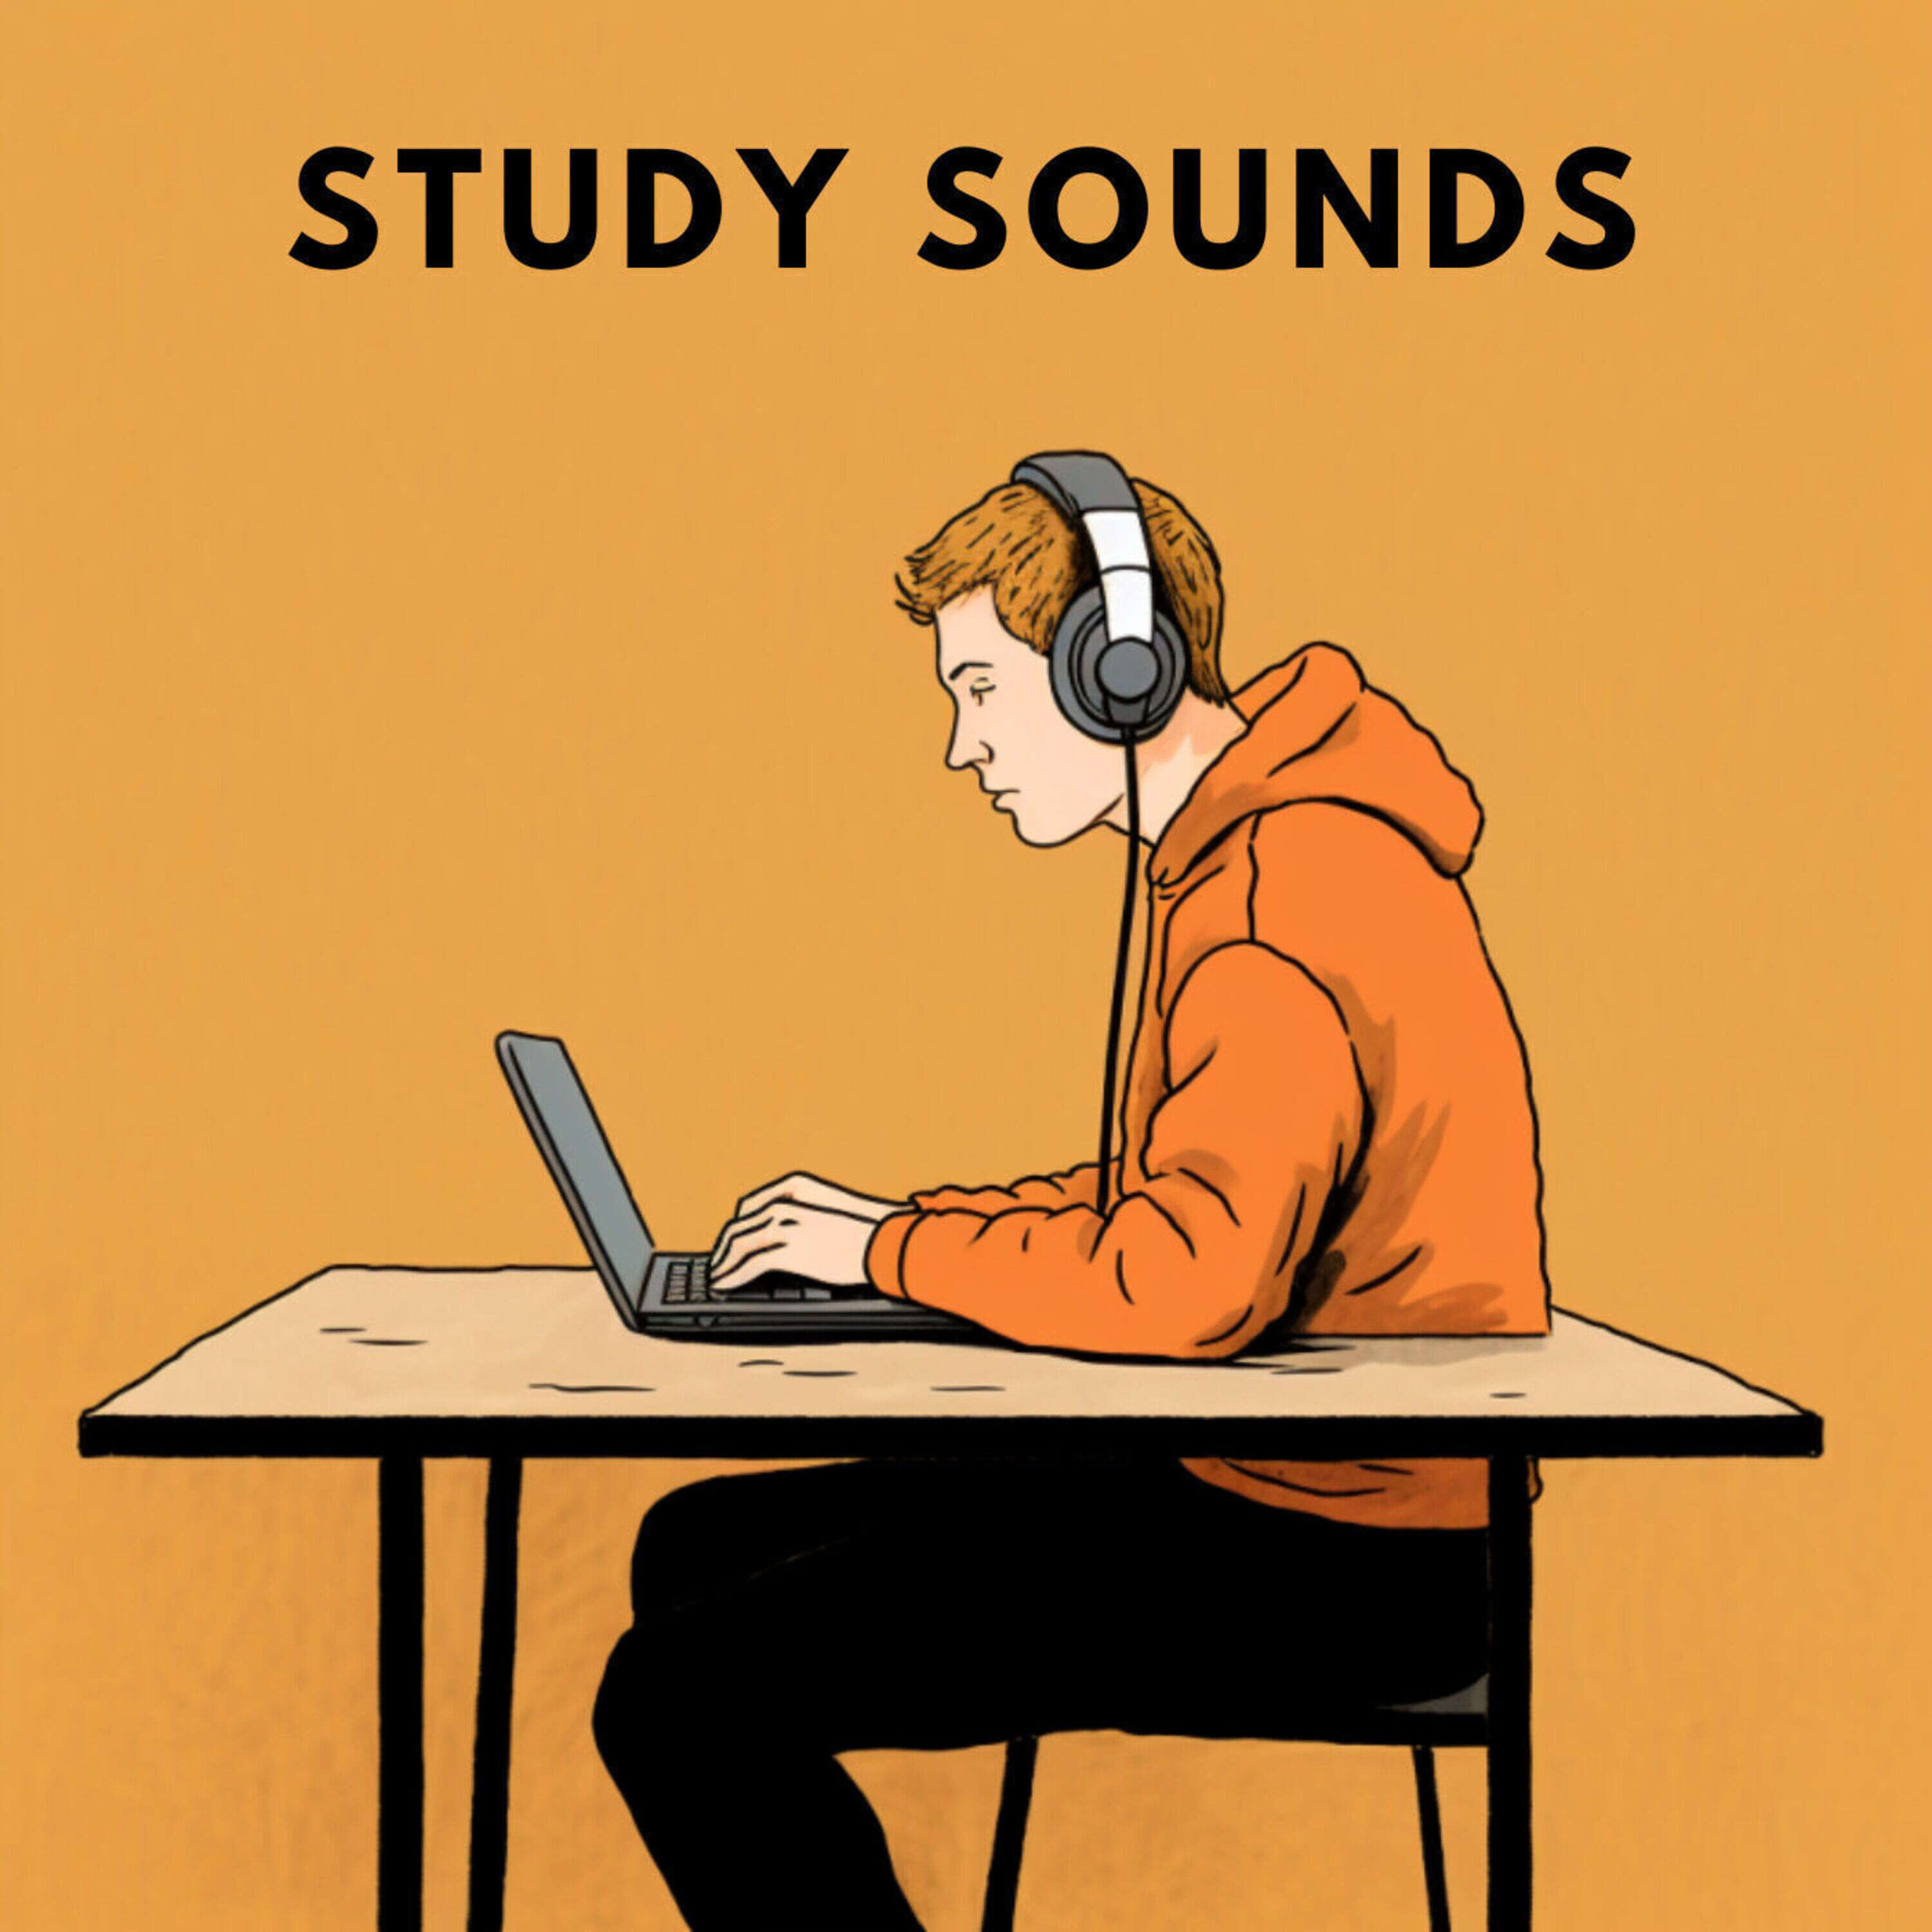 ADHD Relief sounds : Polyrhythmic sounds for Focus and Studying